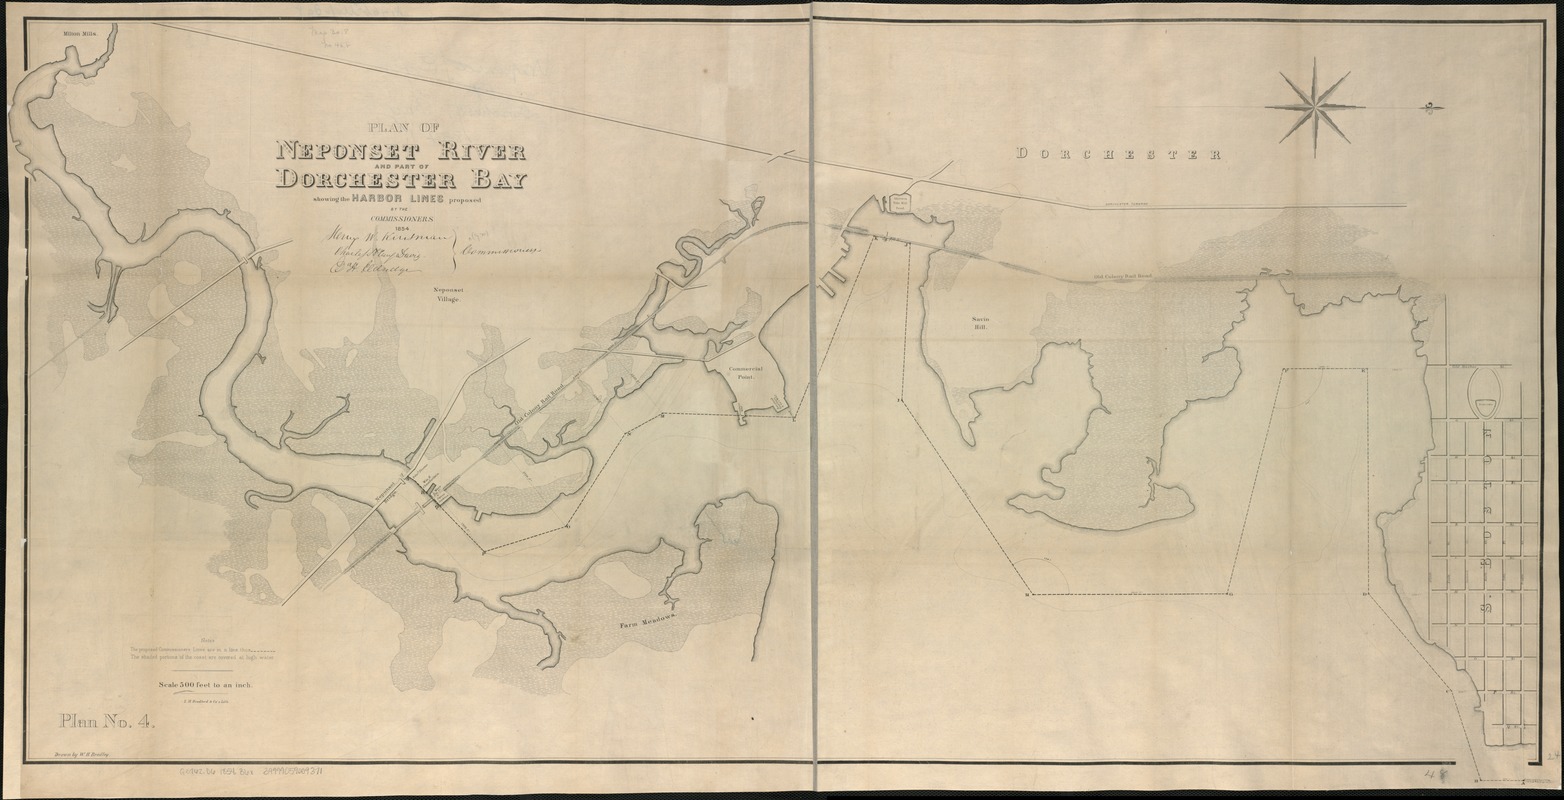 Plan of Neponset River and part of Dorchester Bay showing the harbor lines proposed by the Commissioners 1854